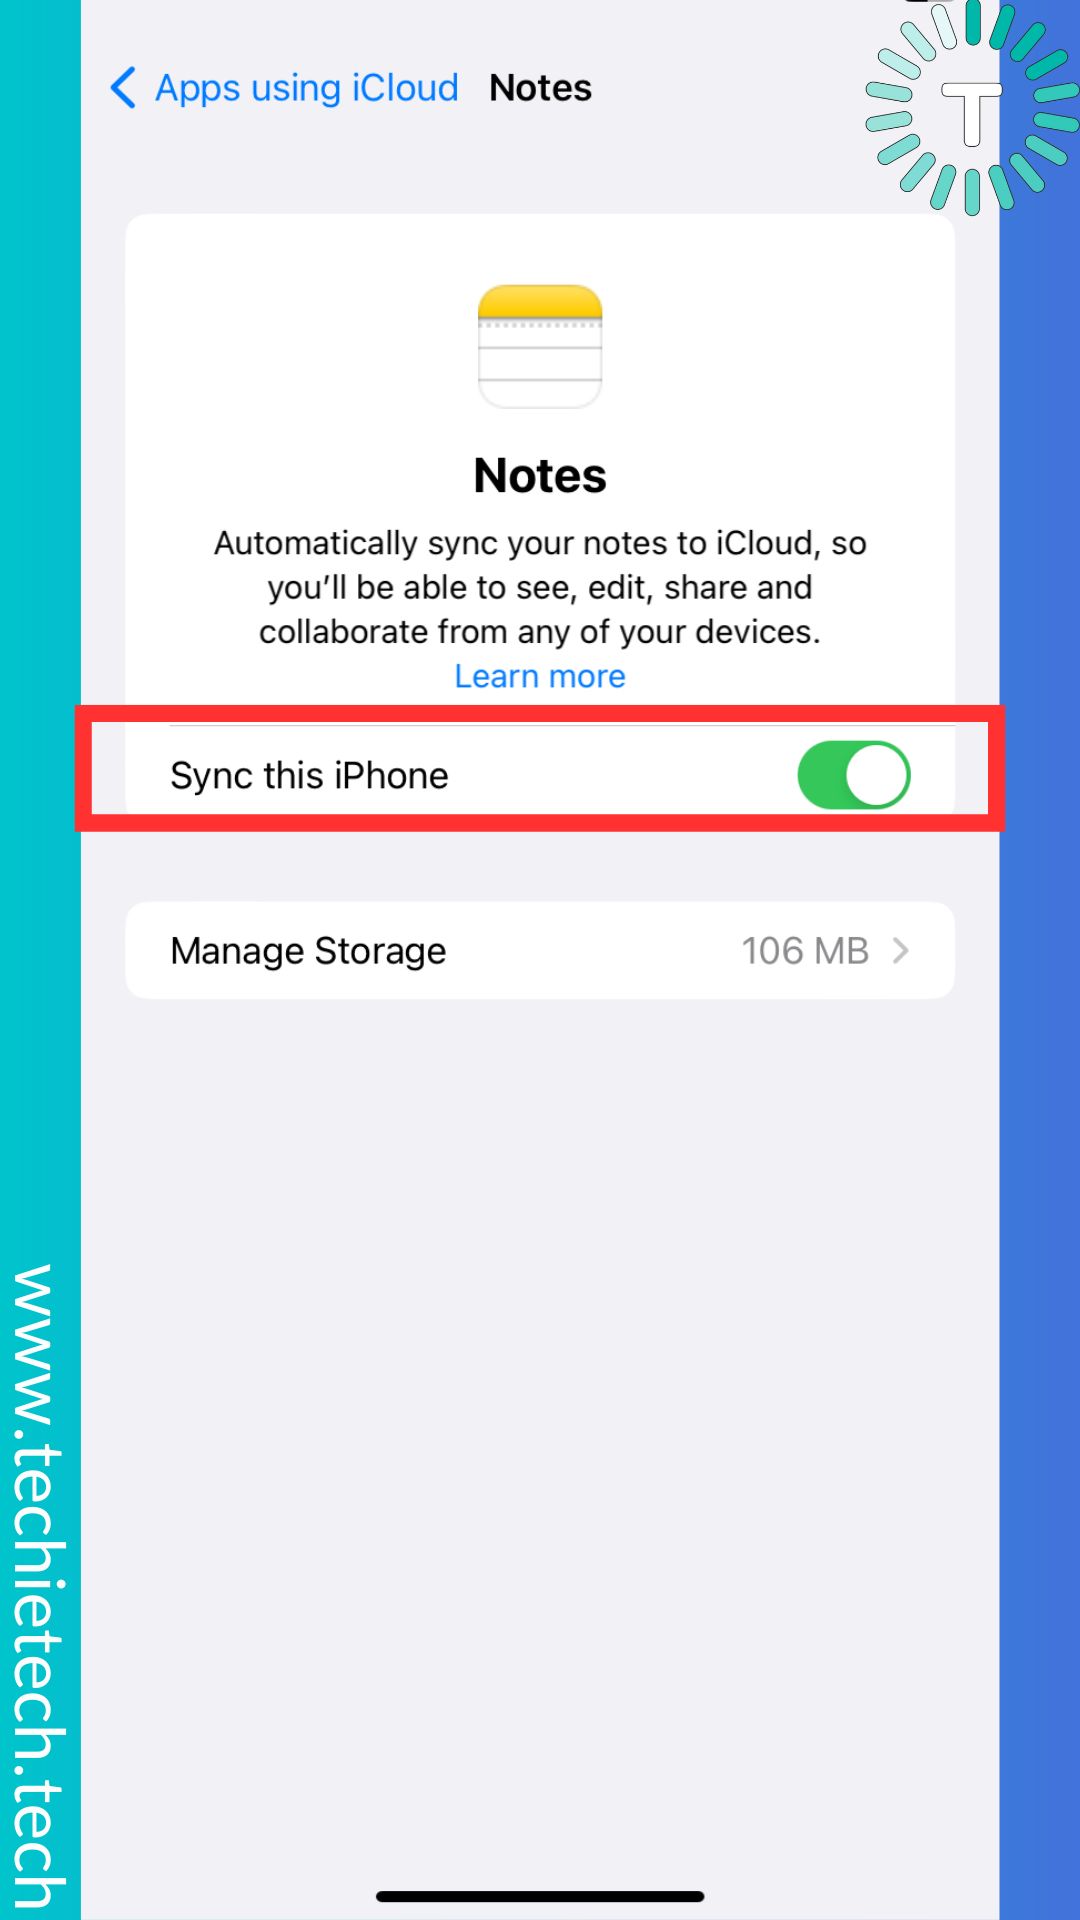 tap on Notes and toggle the switch to enable Sync this iPhone.